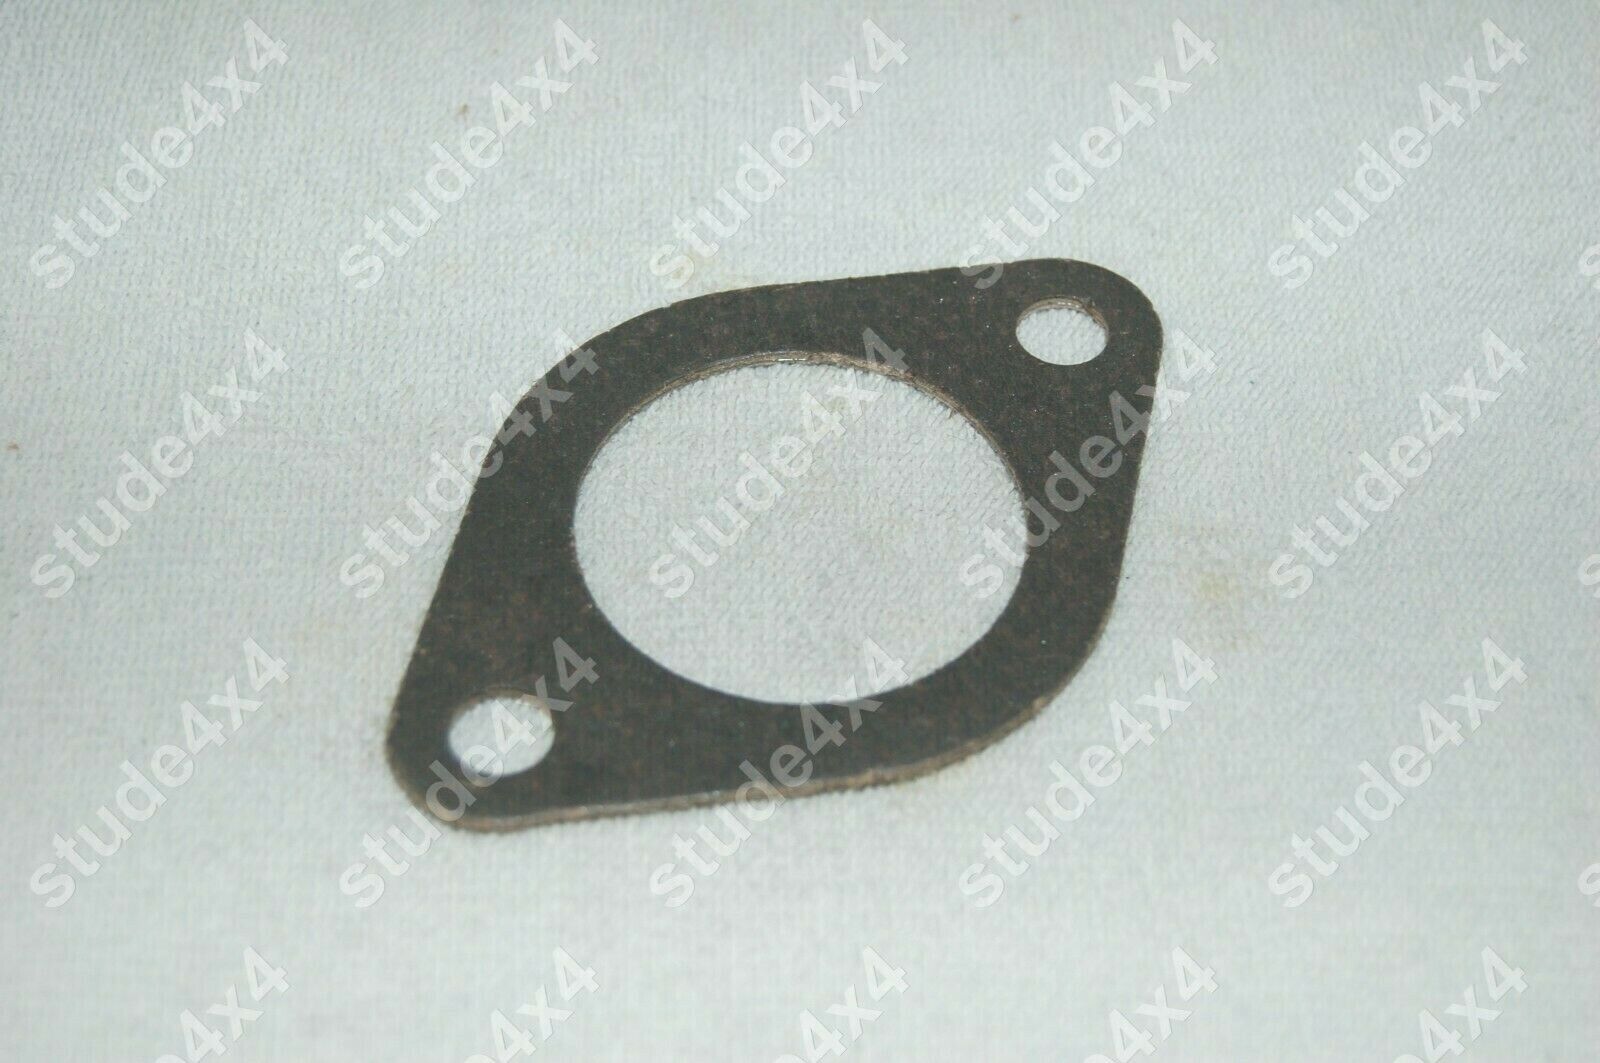 226 & 230 EXHAUST FLANGE GASKET FOR WILLYS JEEP 1954-67 # 745608